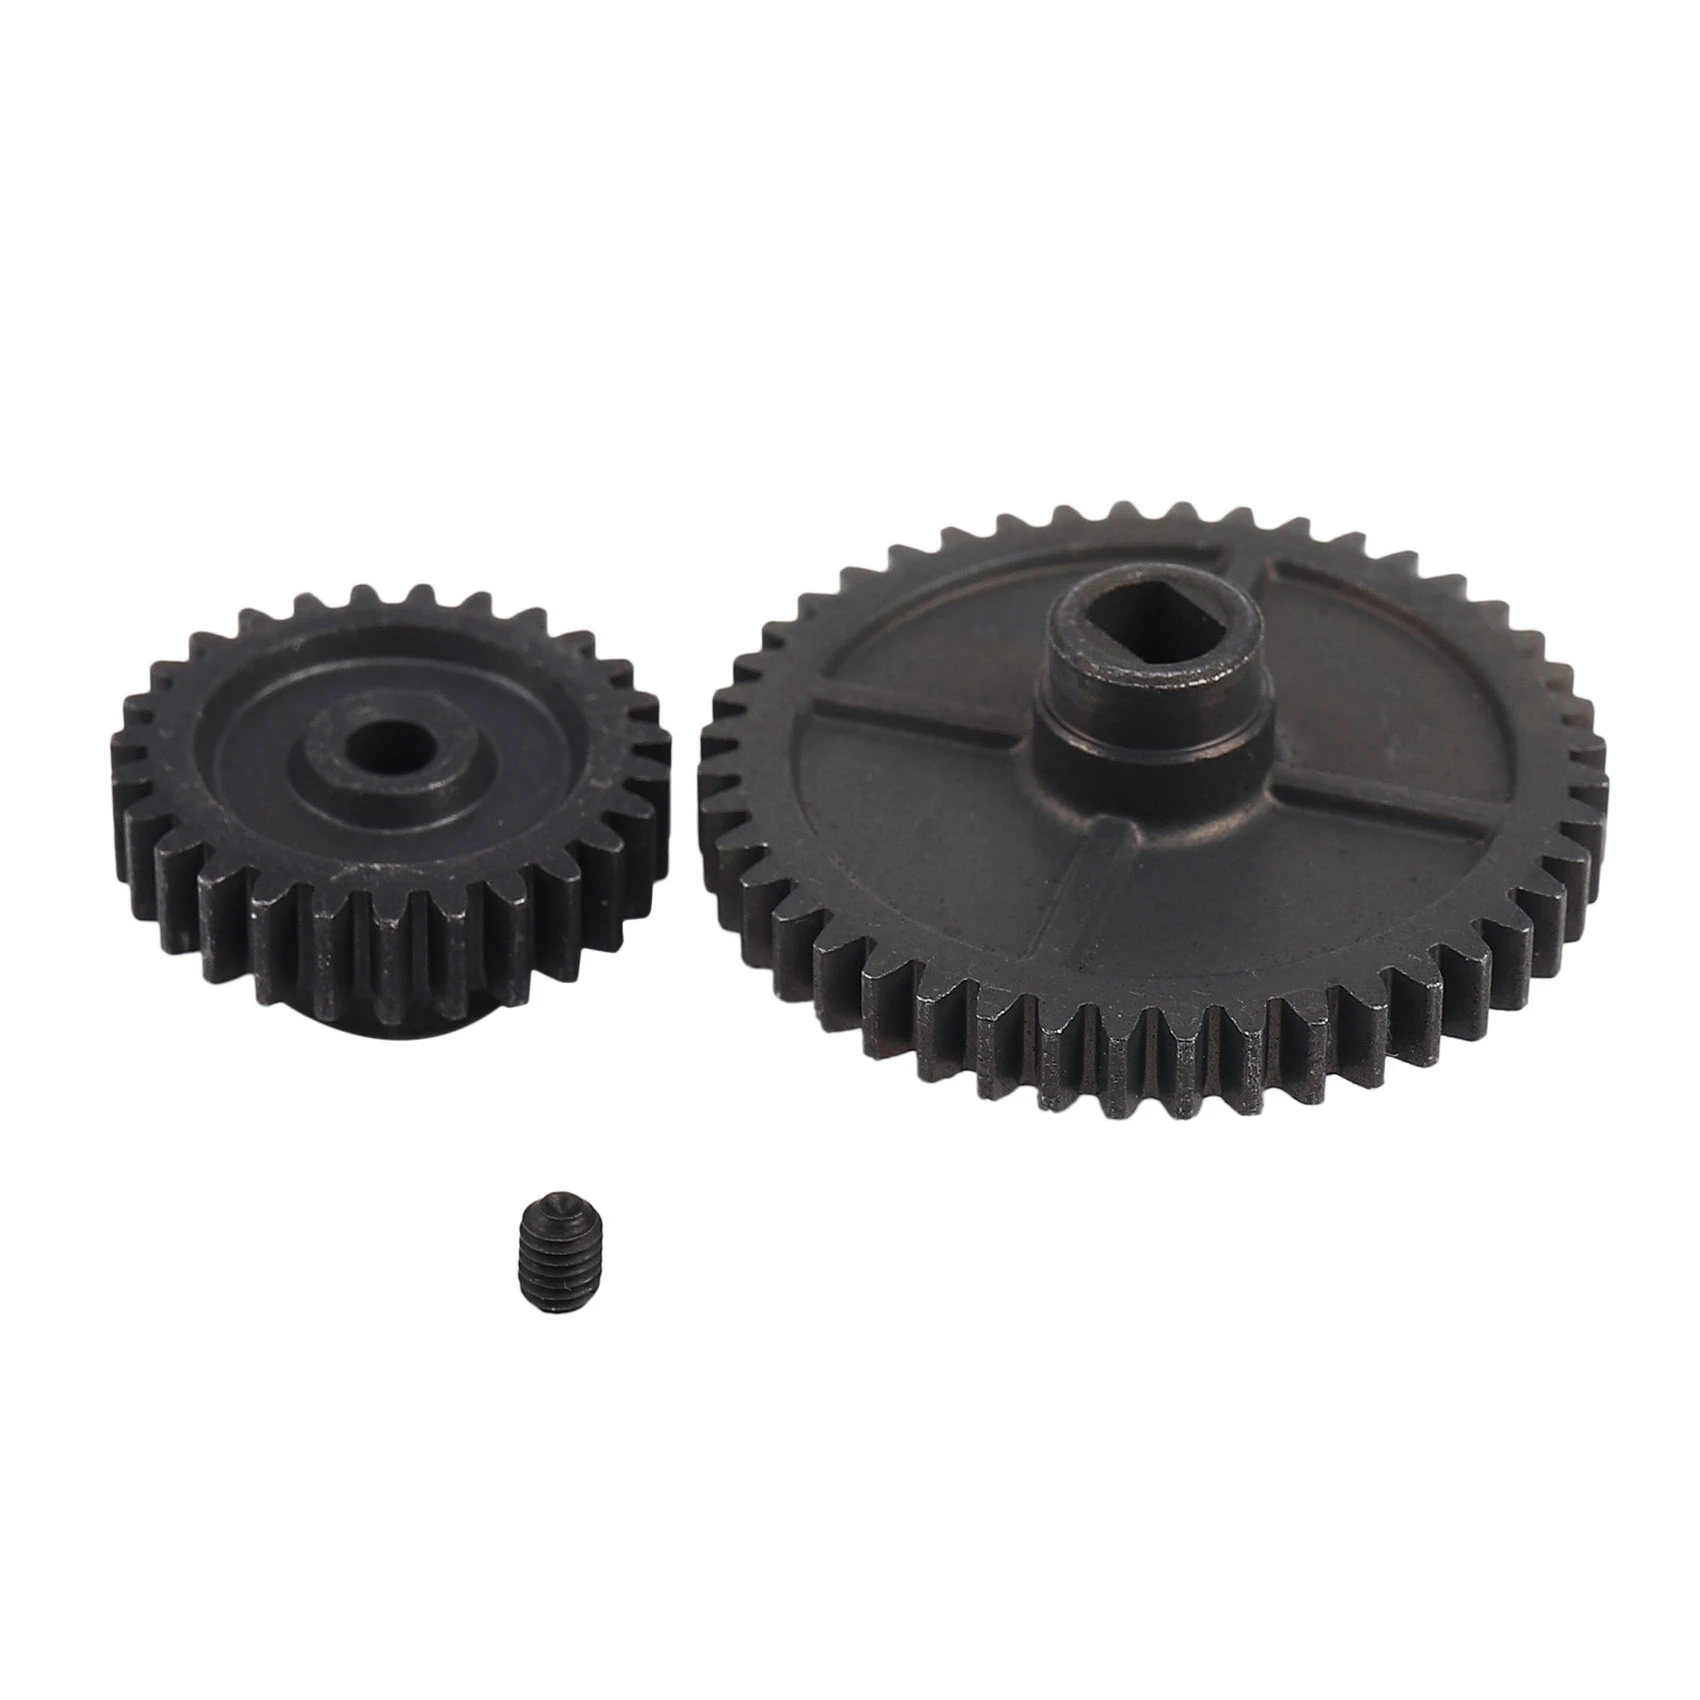 

Steel 44T Reduction Gear and 27T Motor Gear for Wltoys 144001 144002 144010 124016 124017 124018 124019 RC Car Upgrades Parts